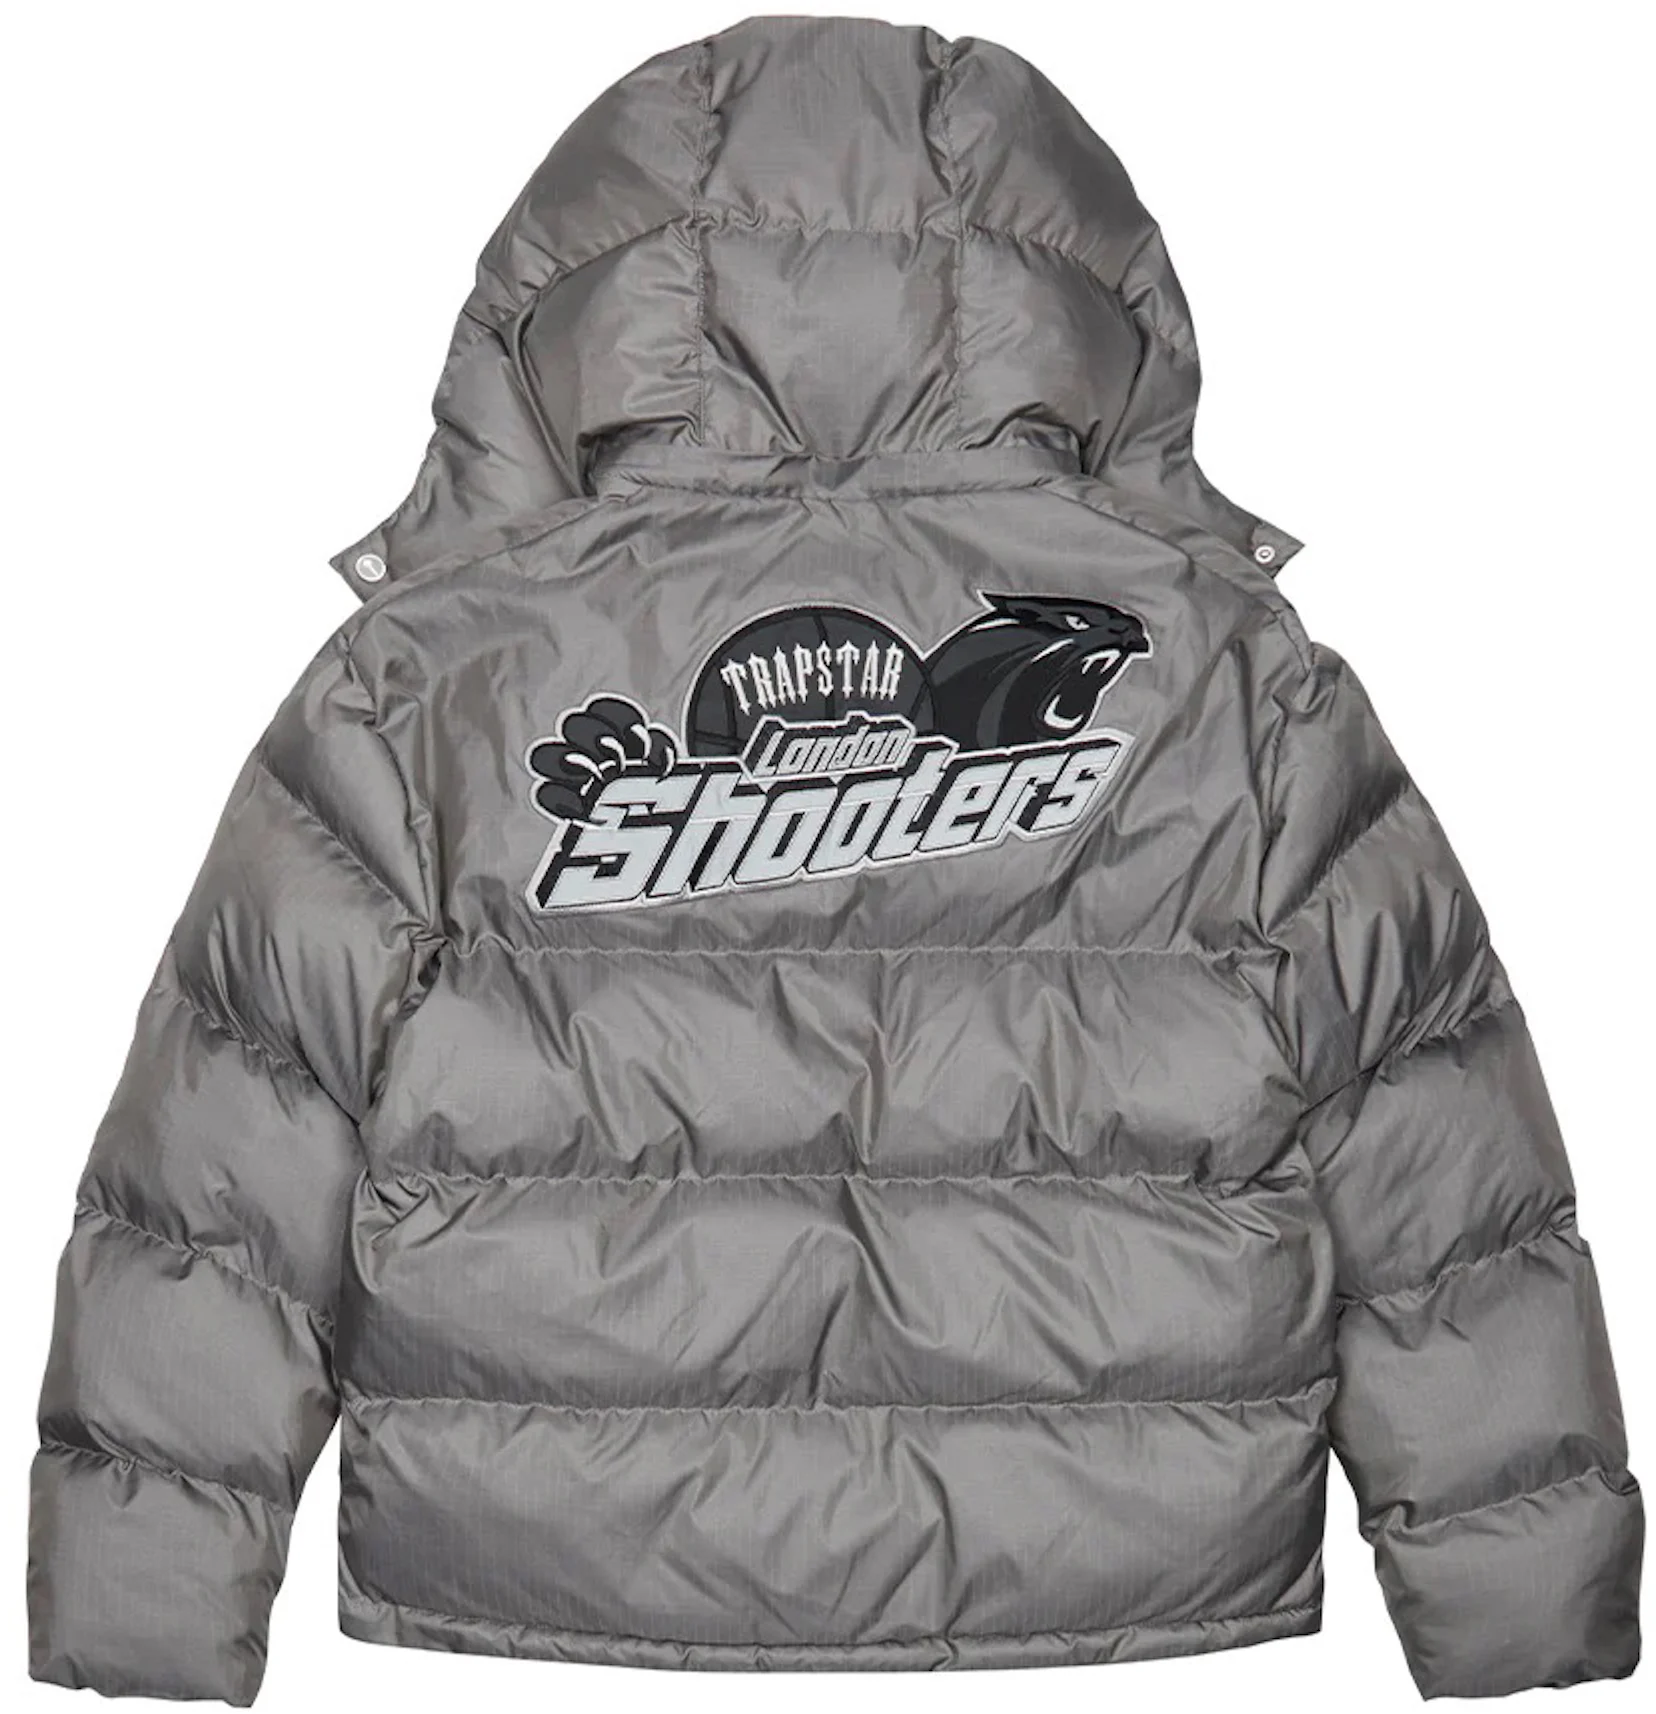 Trapstar Shooters Hooded Puffer Grey Men's - FW22 - US